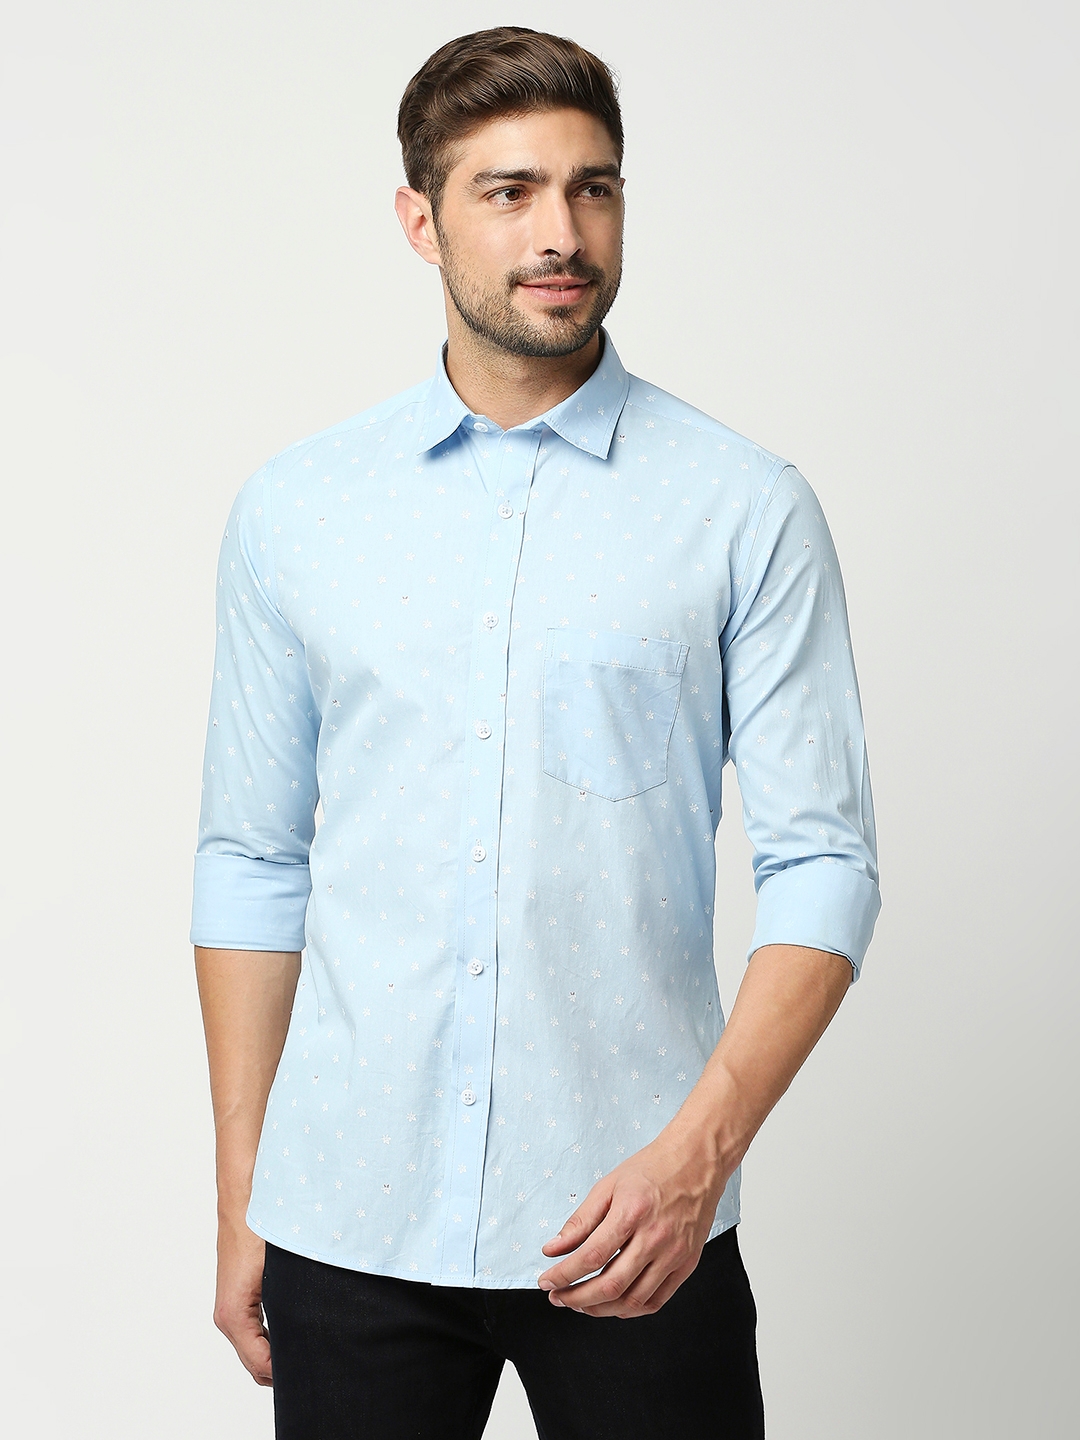 EVOQ | EVOQ's Sky Blue Micro Floral Printed Full Sleeves Cotton Casual Shirt for Men